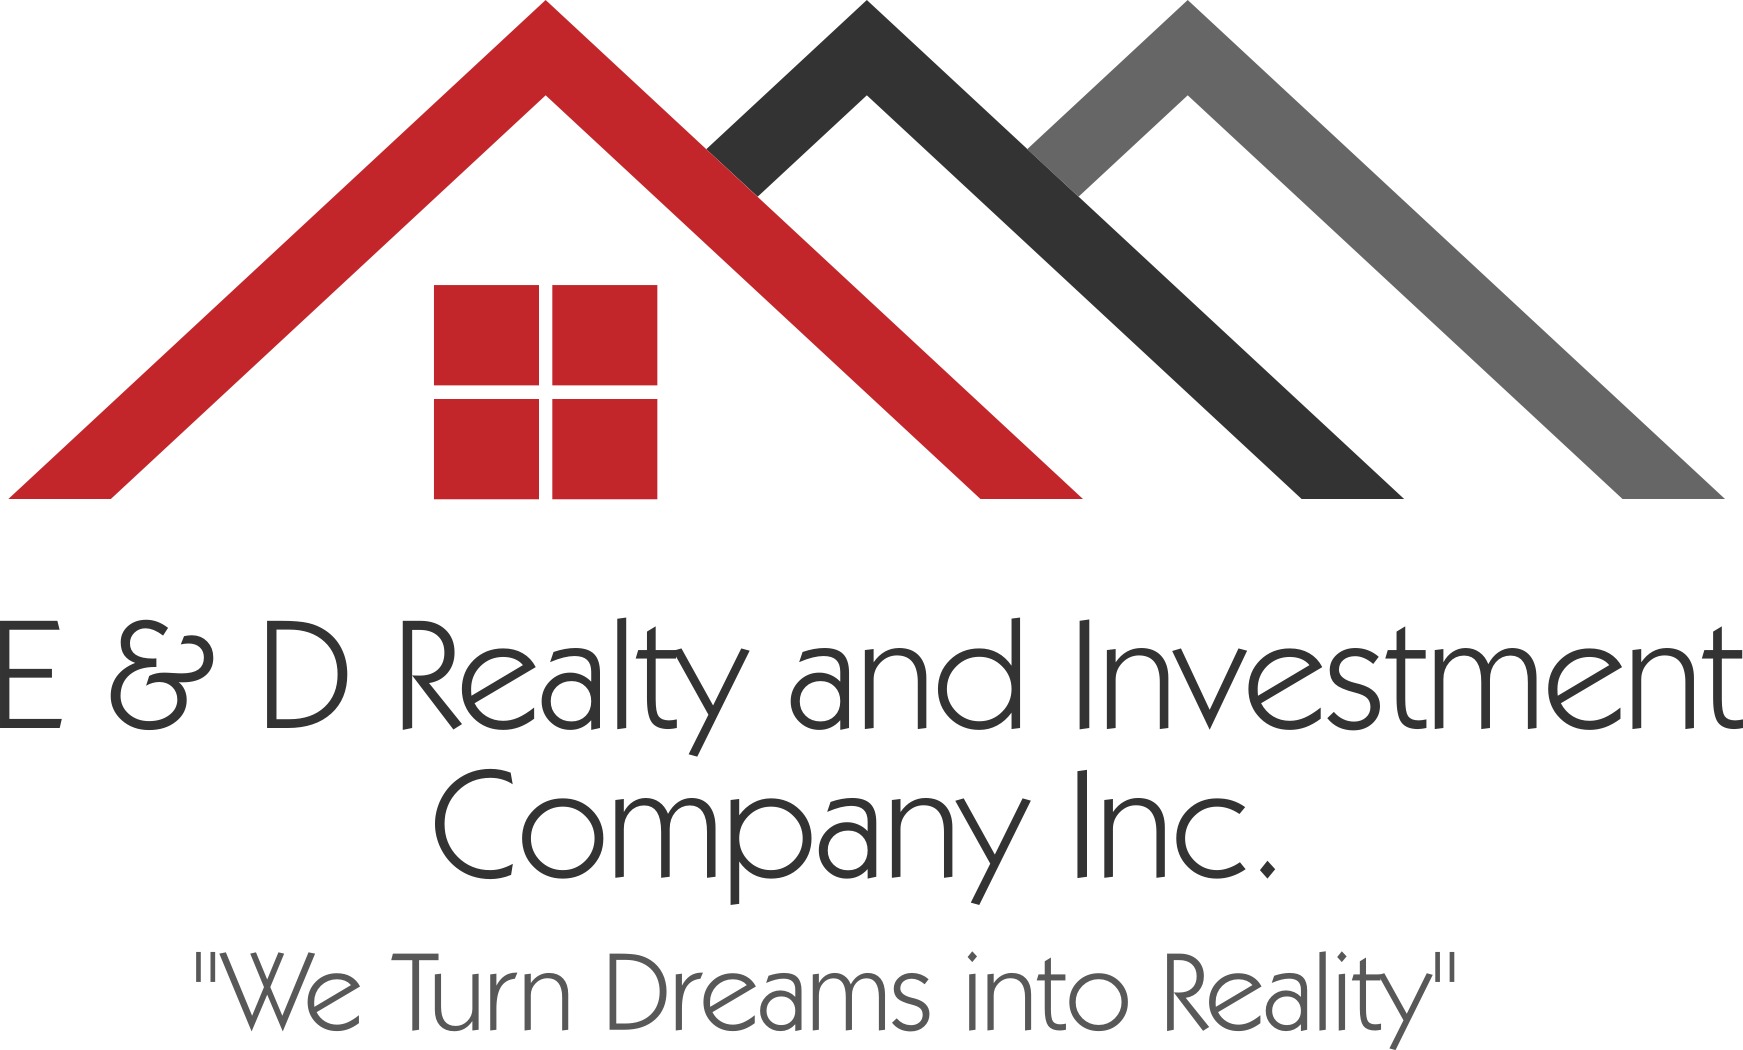 ED REALTY INVESTMENT COMPANY INC.